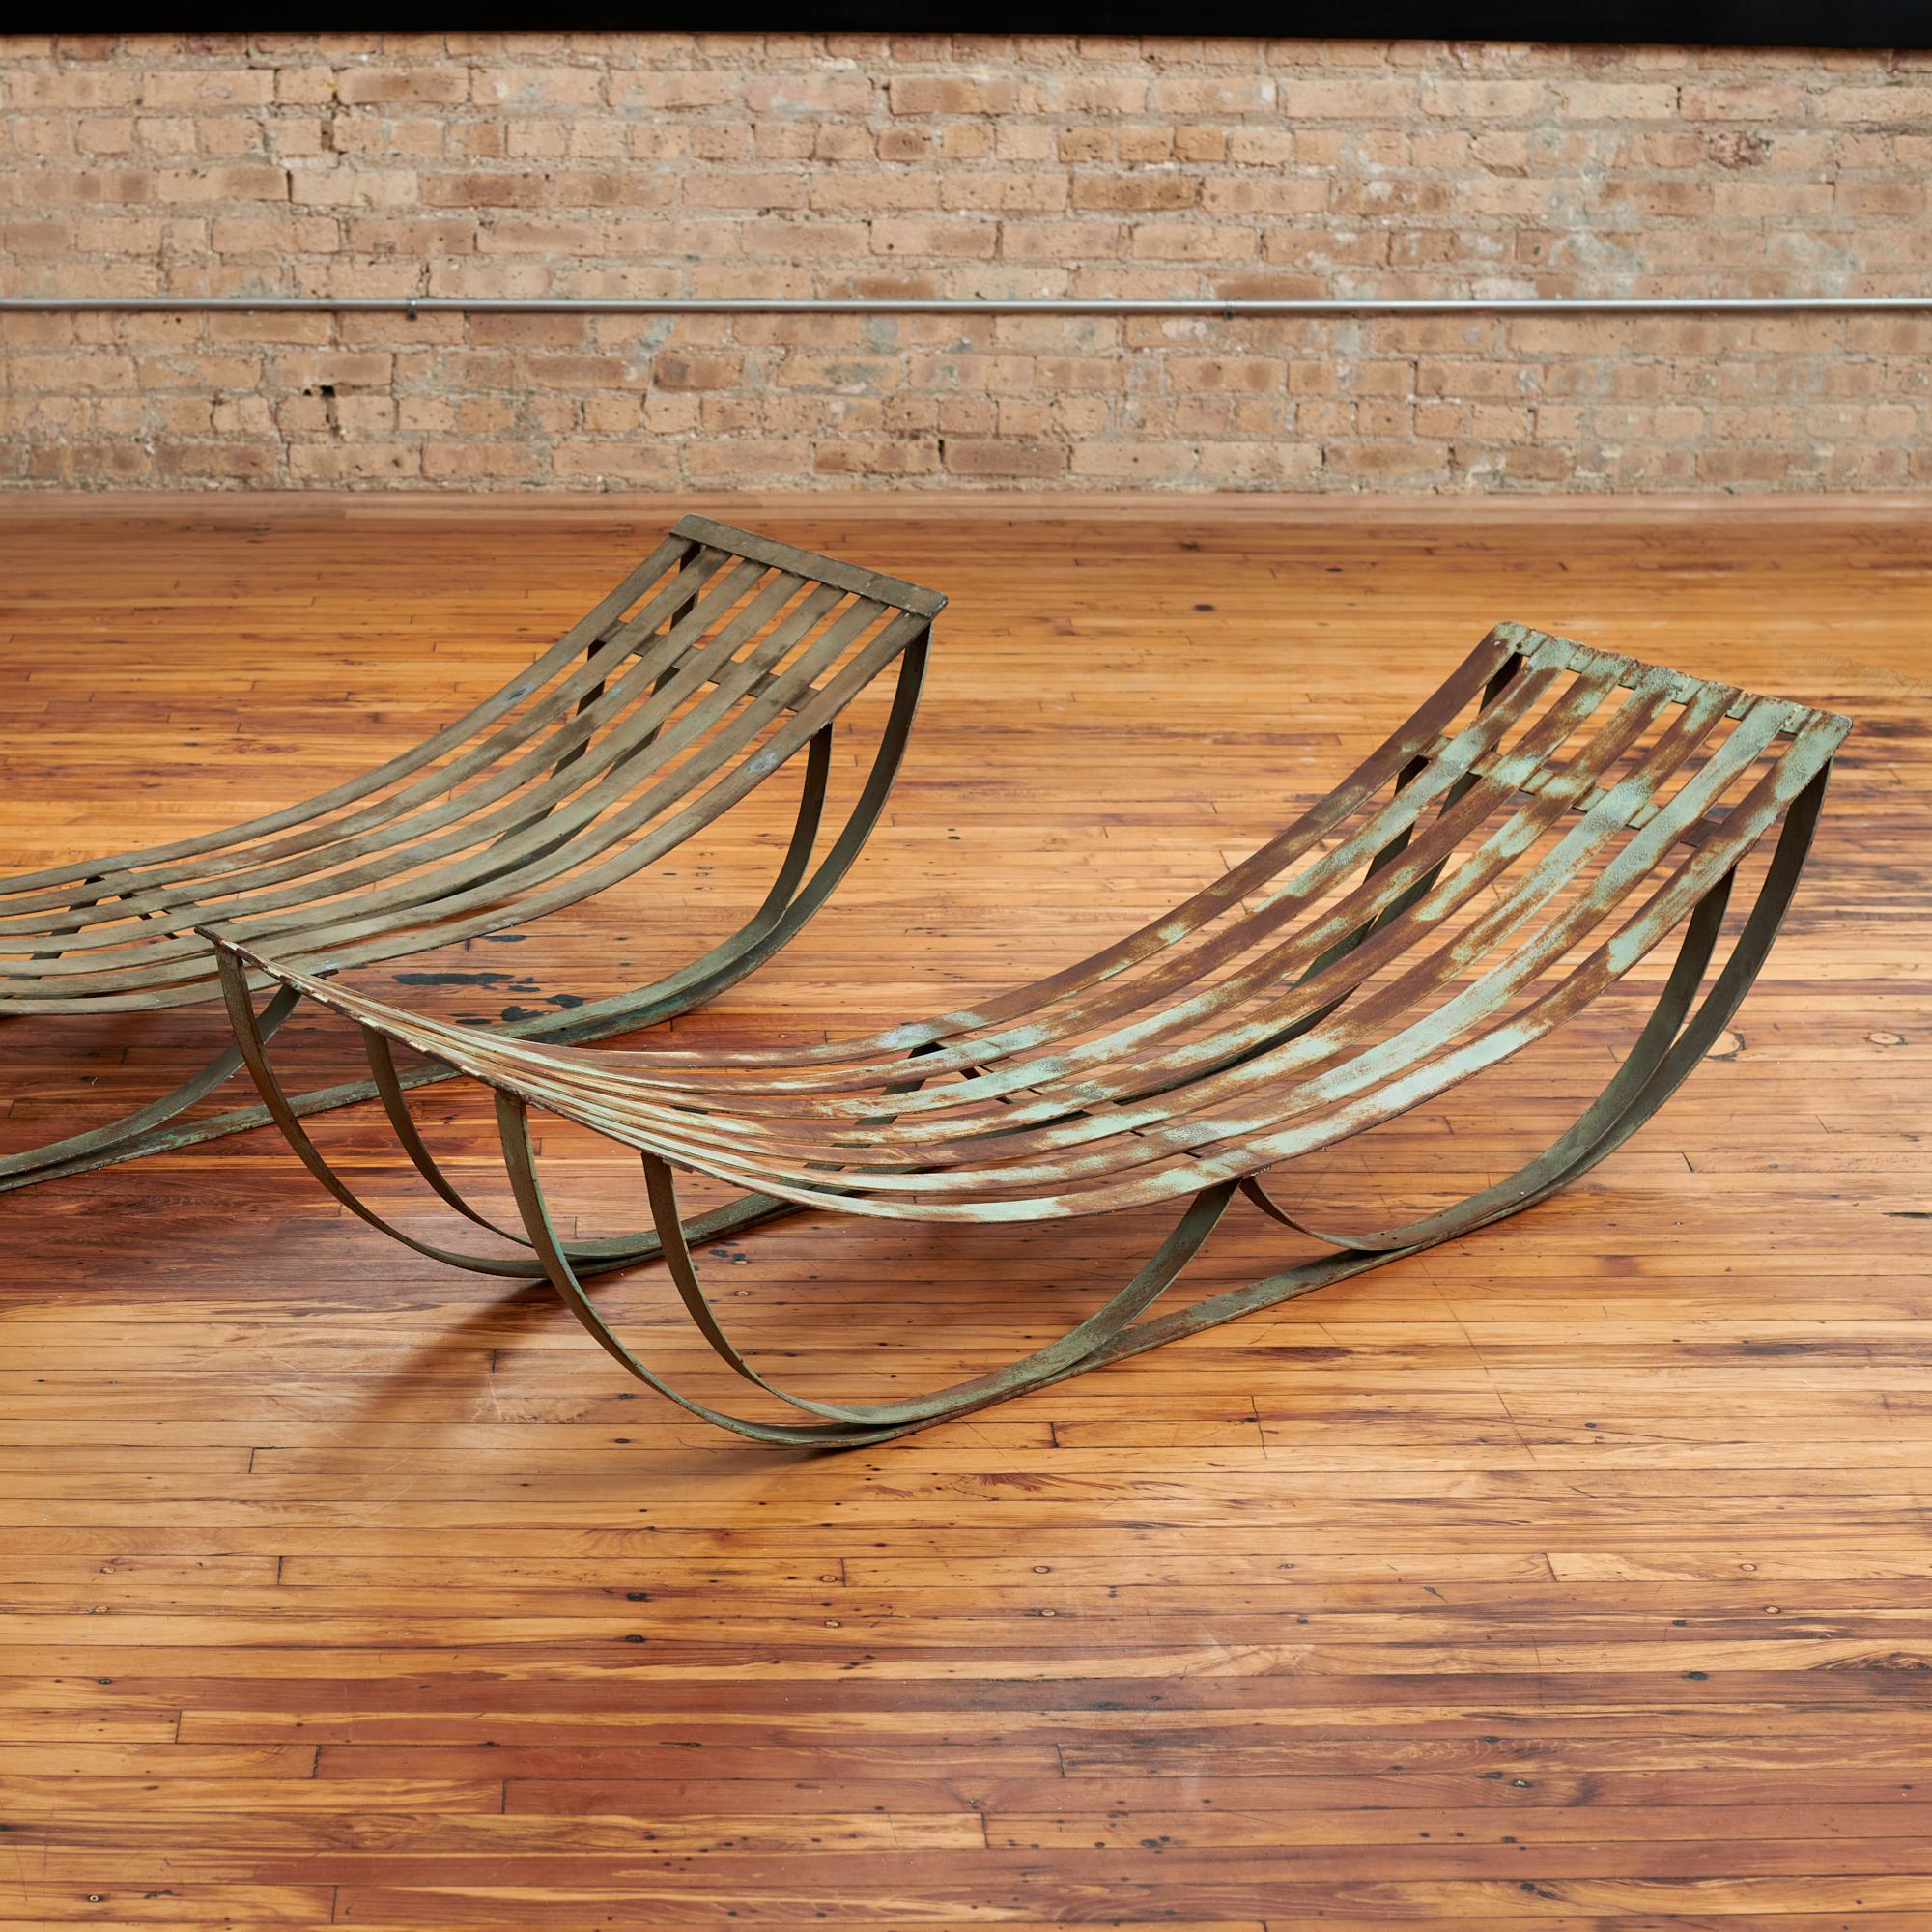 Pair of French sculptural steel lounges, circa 1950s. This fantastic pair retains the original finish which has aged beautifully. The elegantly curved seats look great on their own or could be softened with new upholstery. These pieces of minimalist